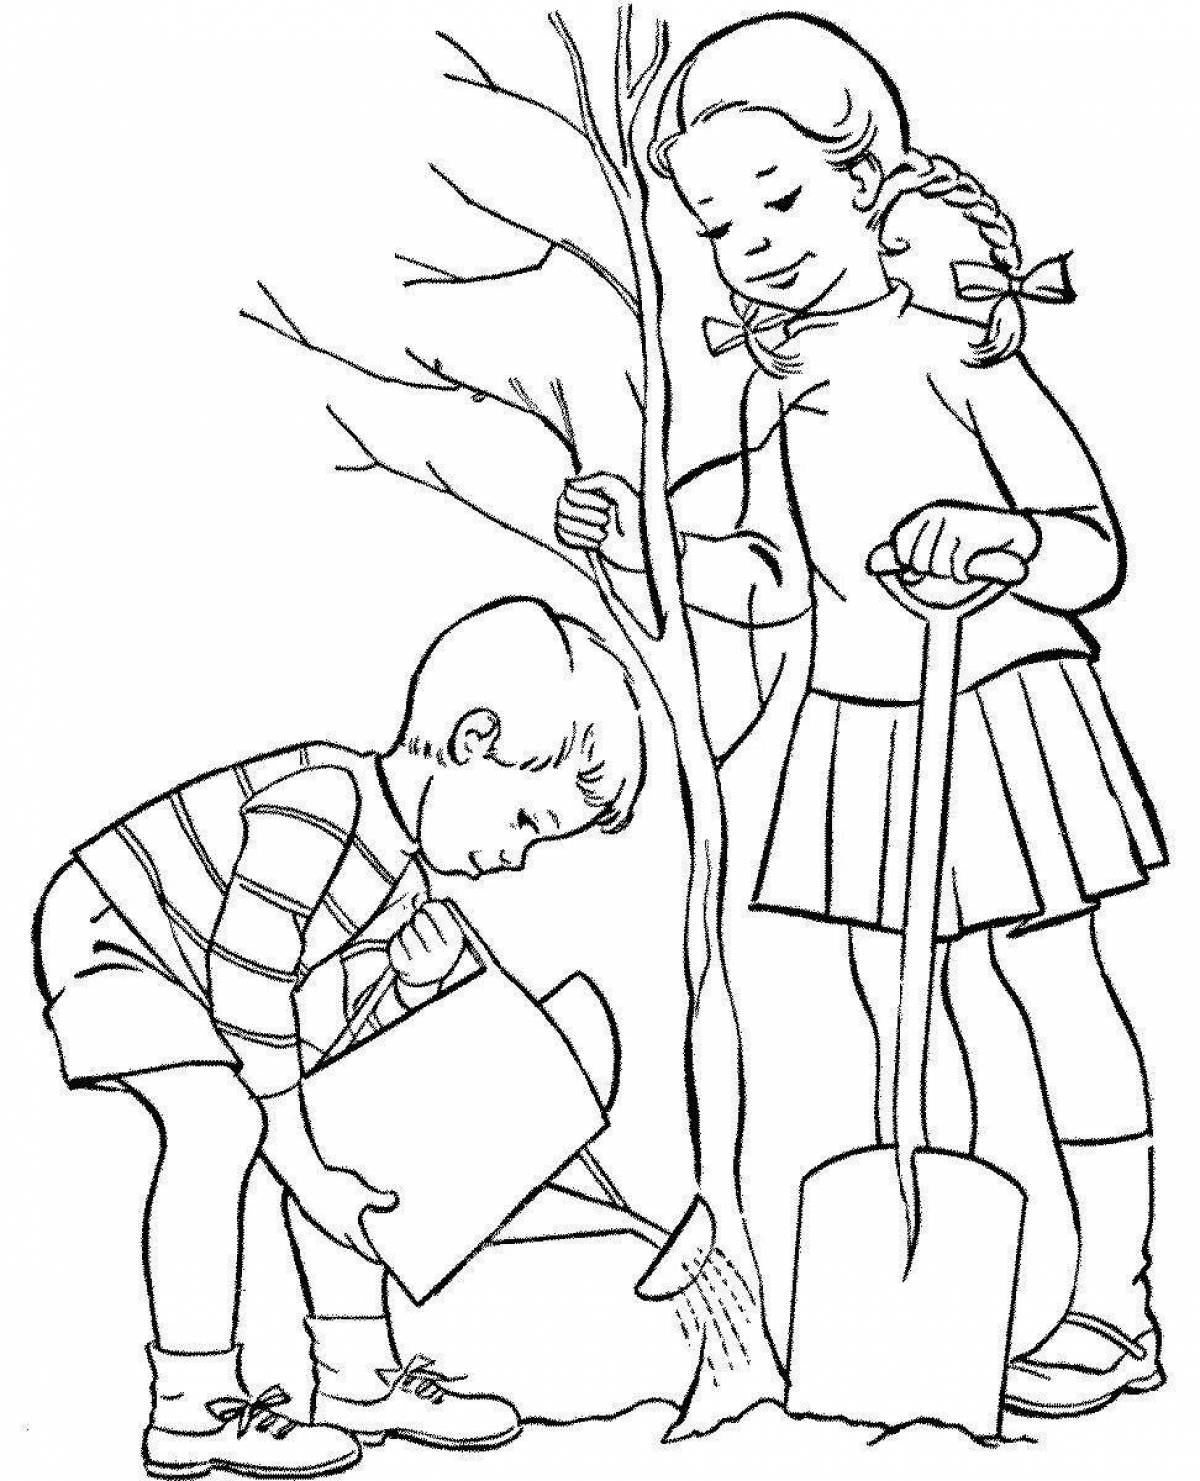 Exciting kindness coloring page